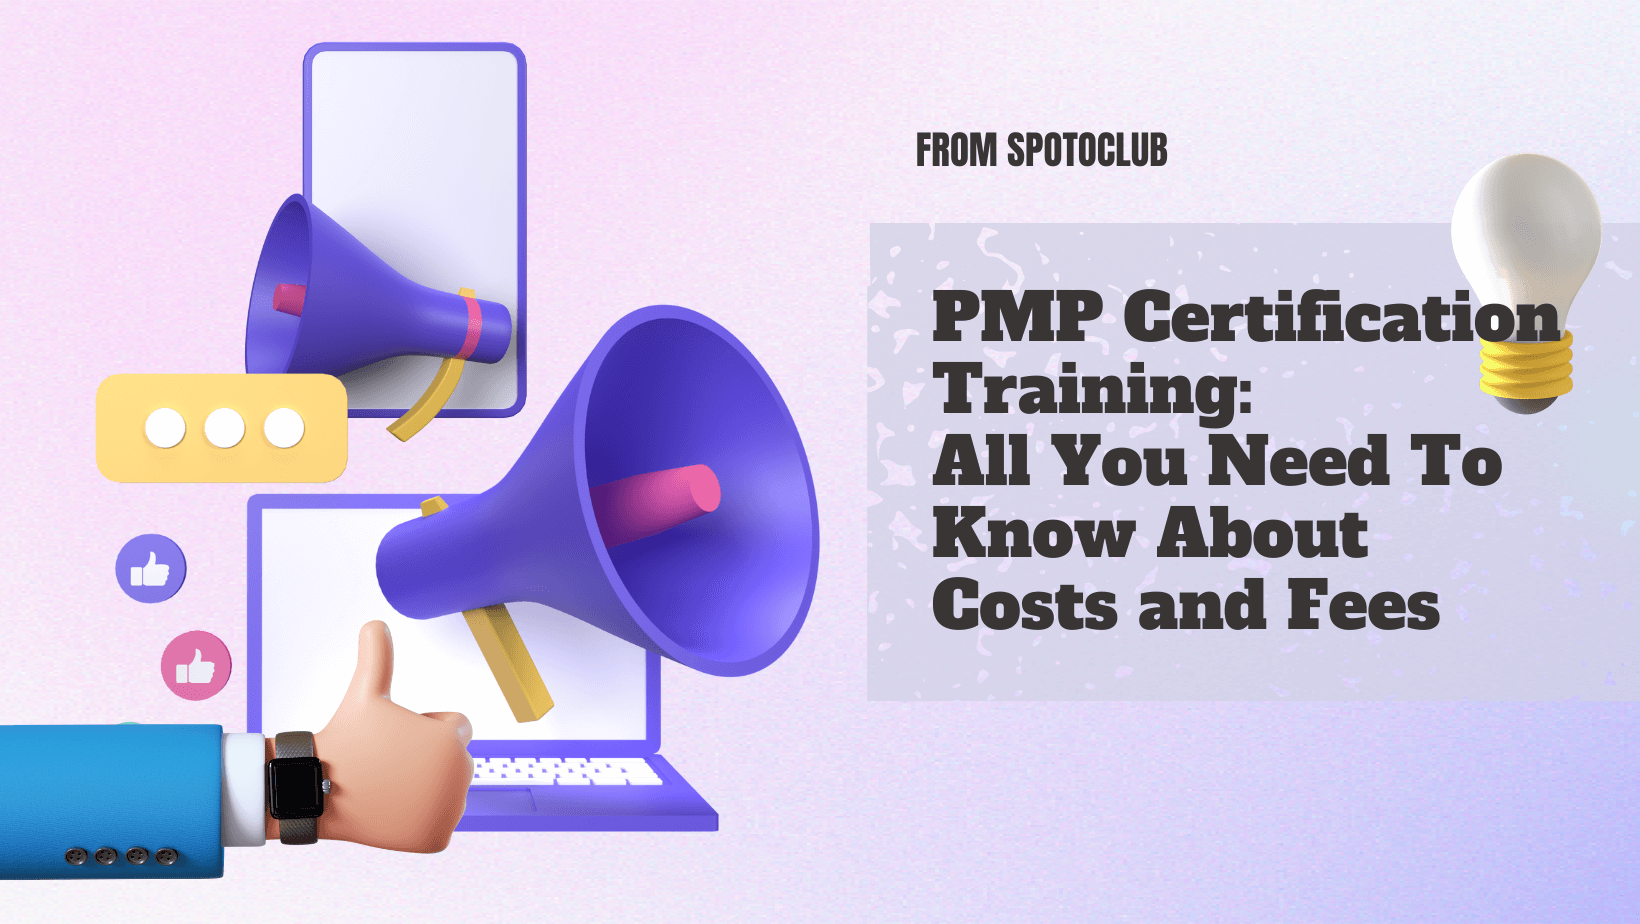 PMP Certification Training: All You Need To Know About Costs and Fees